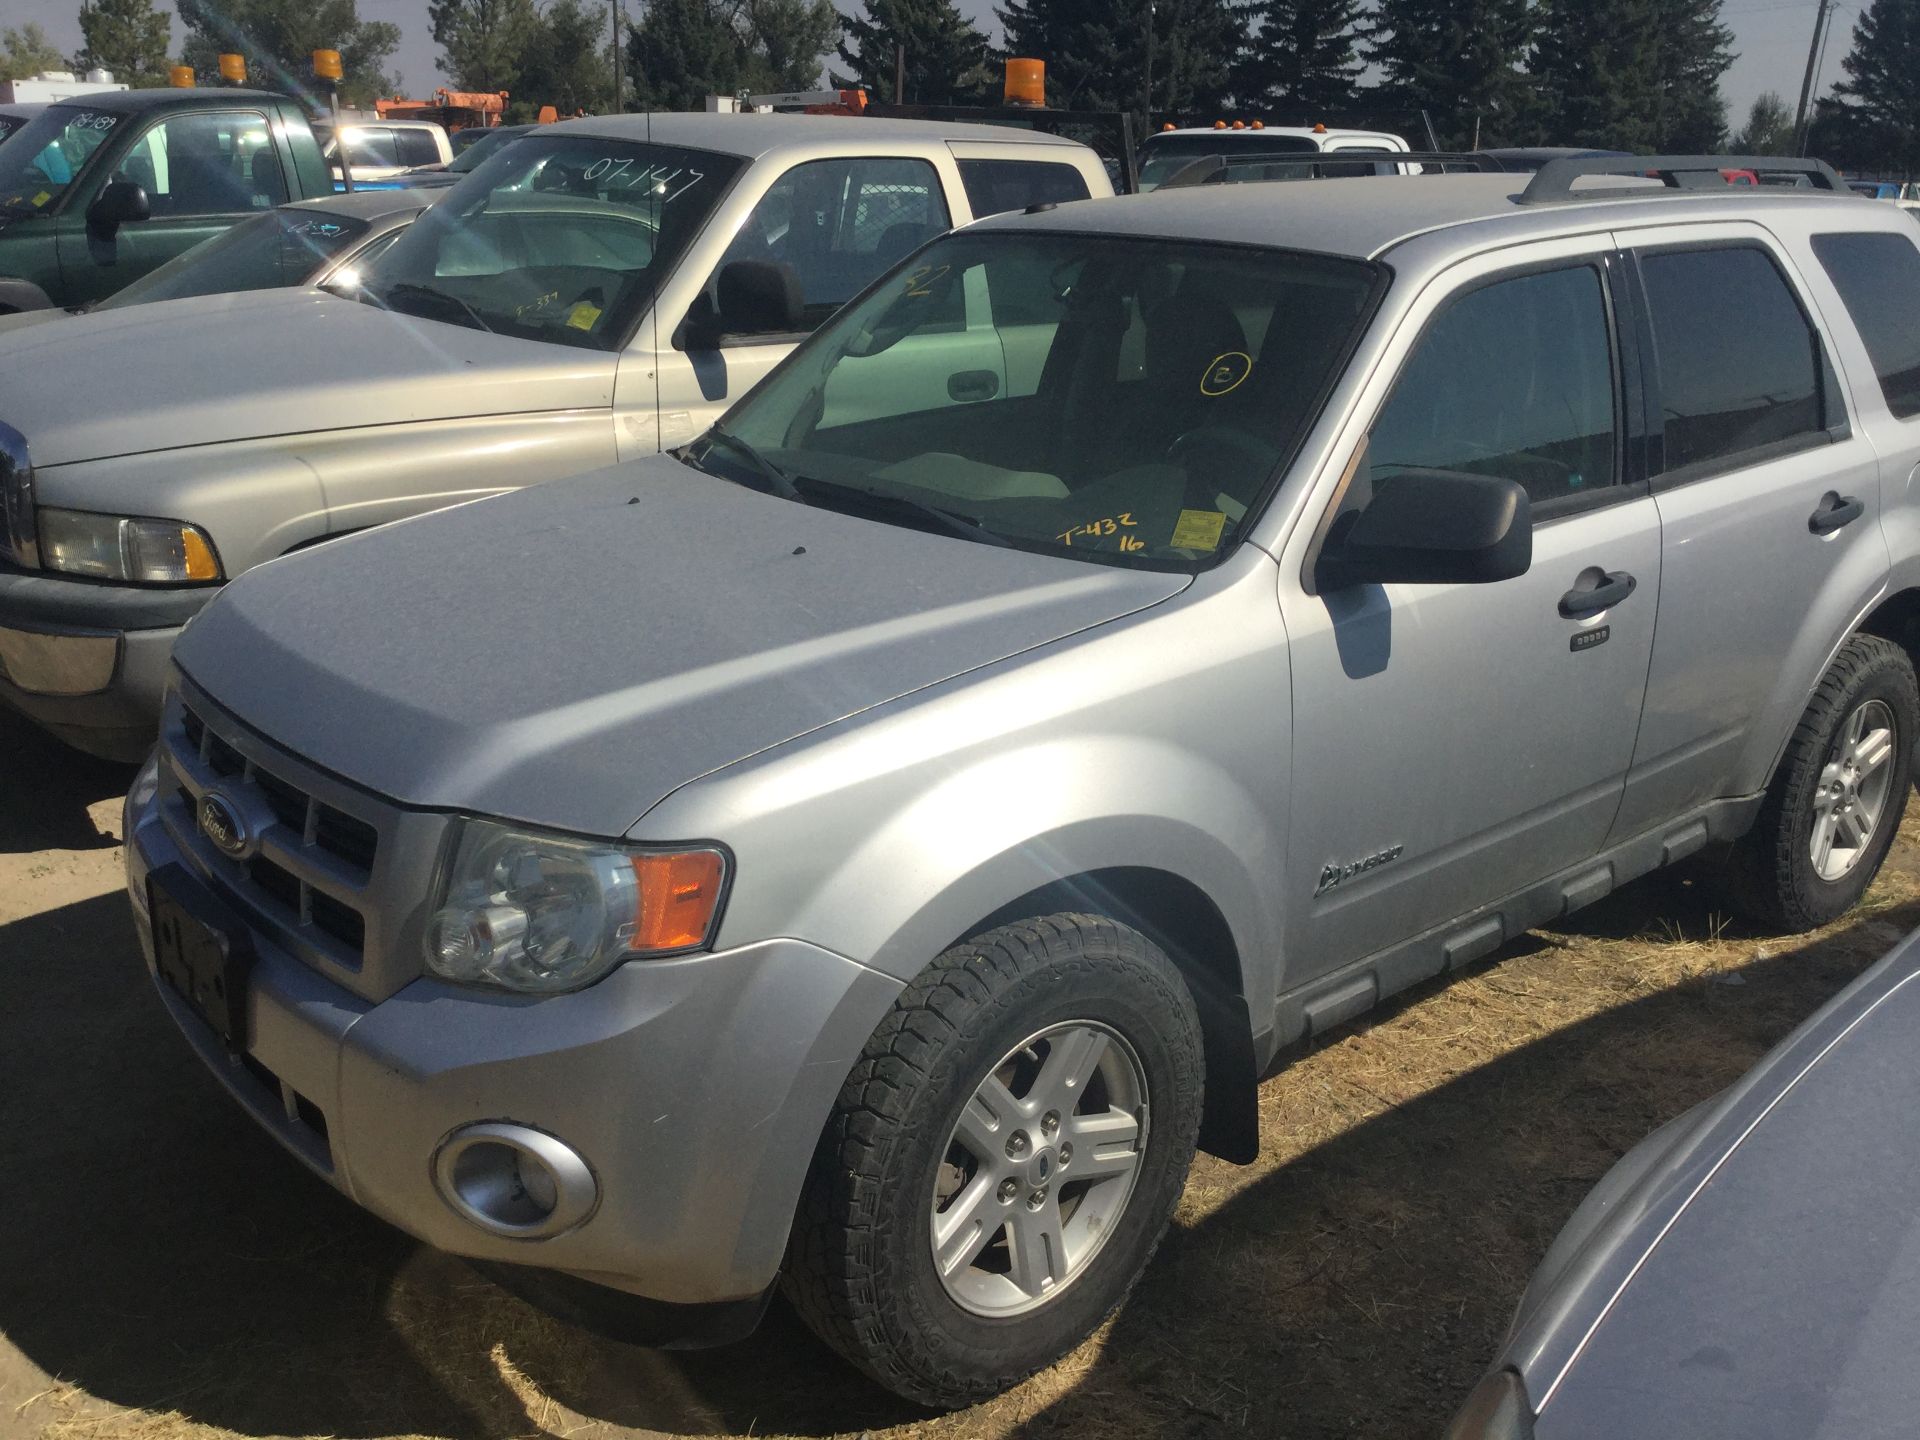 Year: 2010 Make: Ford Model: Escape Hybrid Type: SUV Vin#: C05651 Mileage/Hours: 147403 2.5L, AWD,